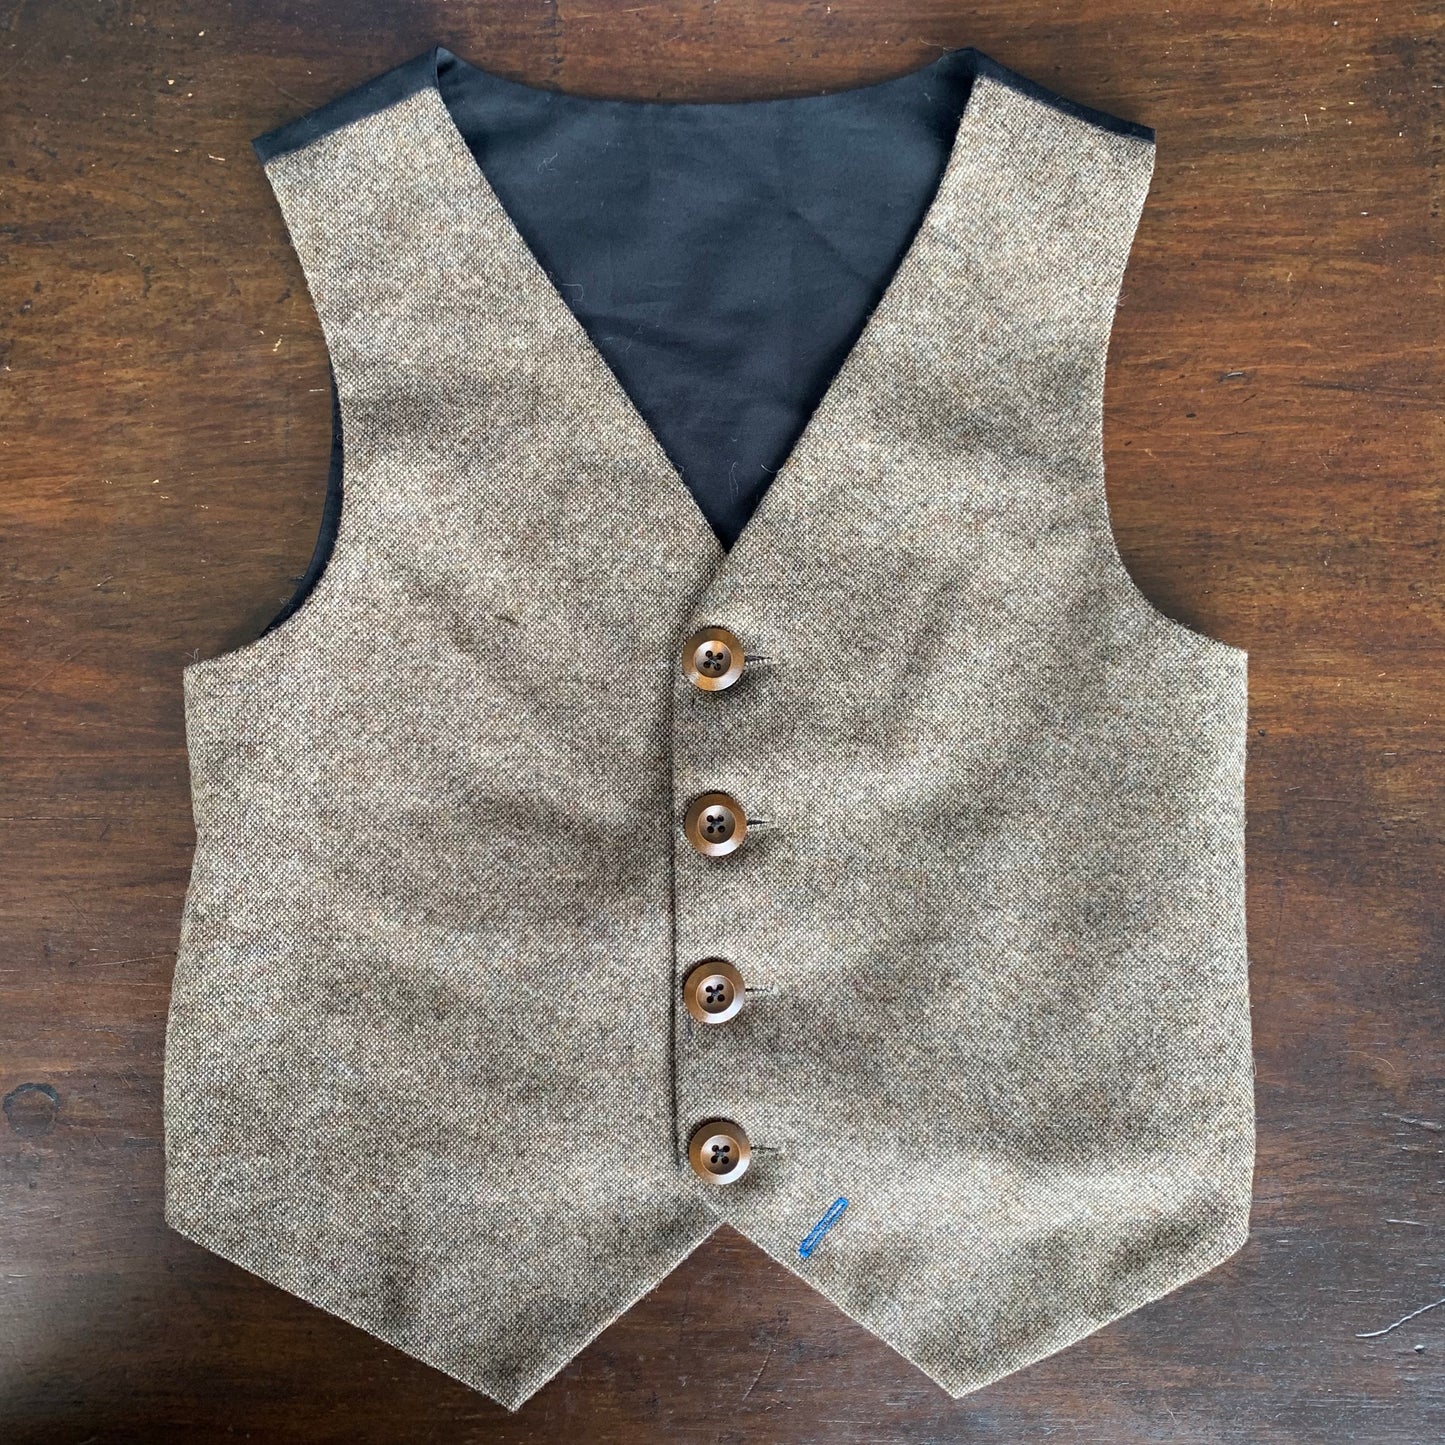 SAMPLE SALE 'Benjamin Button' Boys waistcoat handmade in natural British Tweed with black matt cotton back and lining size 7-8 years